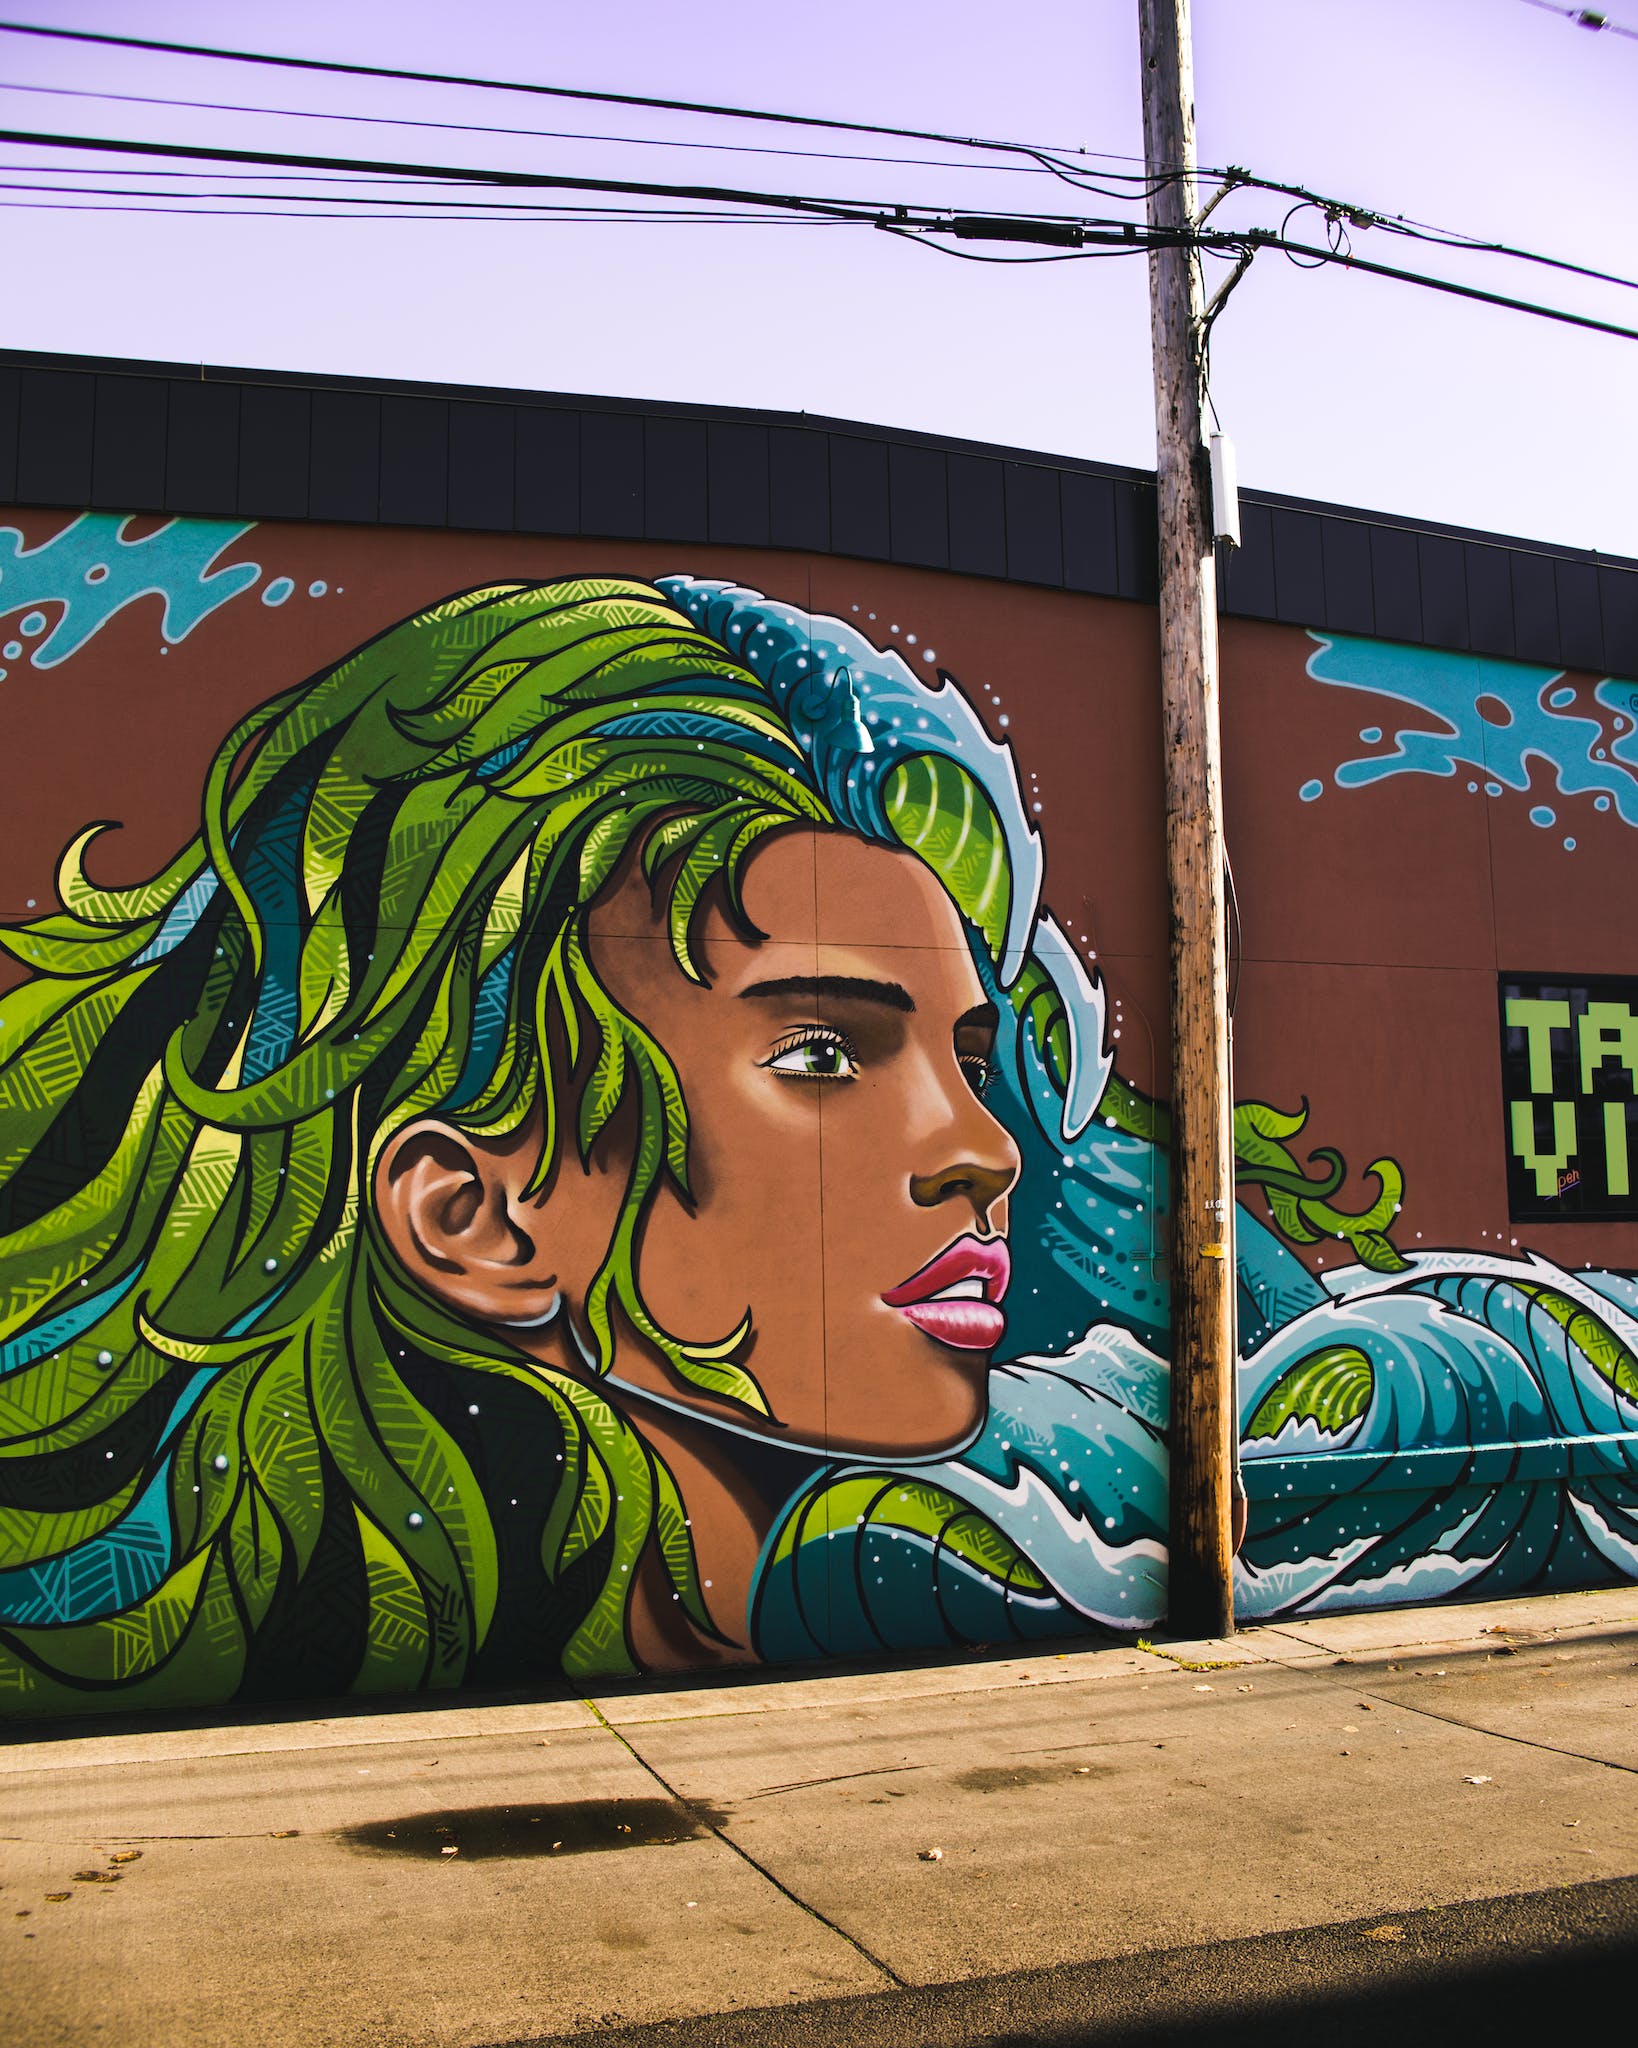 Woman With Blue and Green Haired Wall Painting